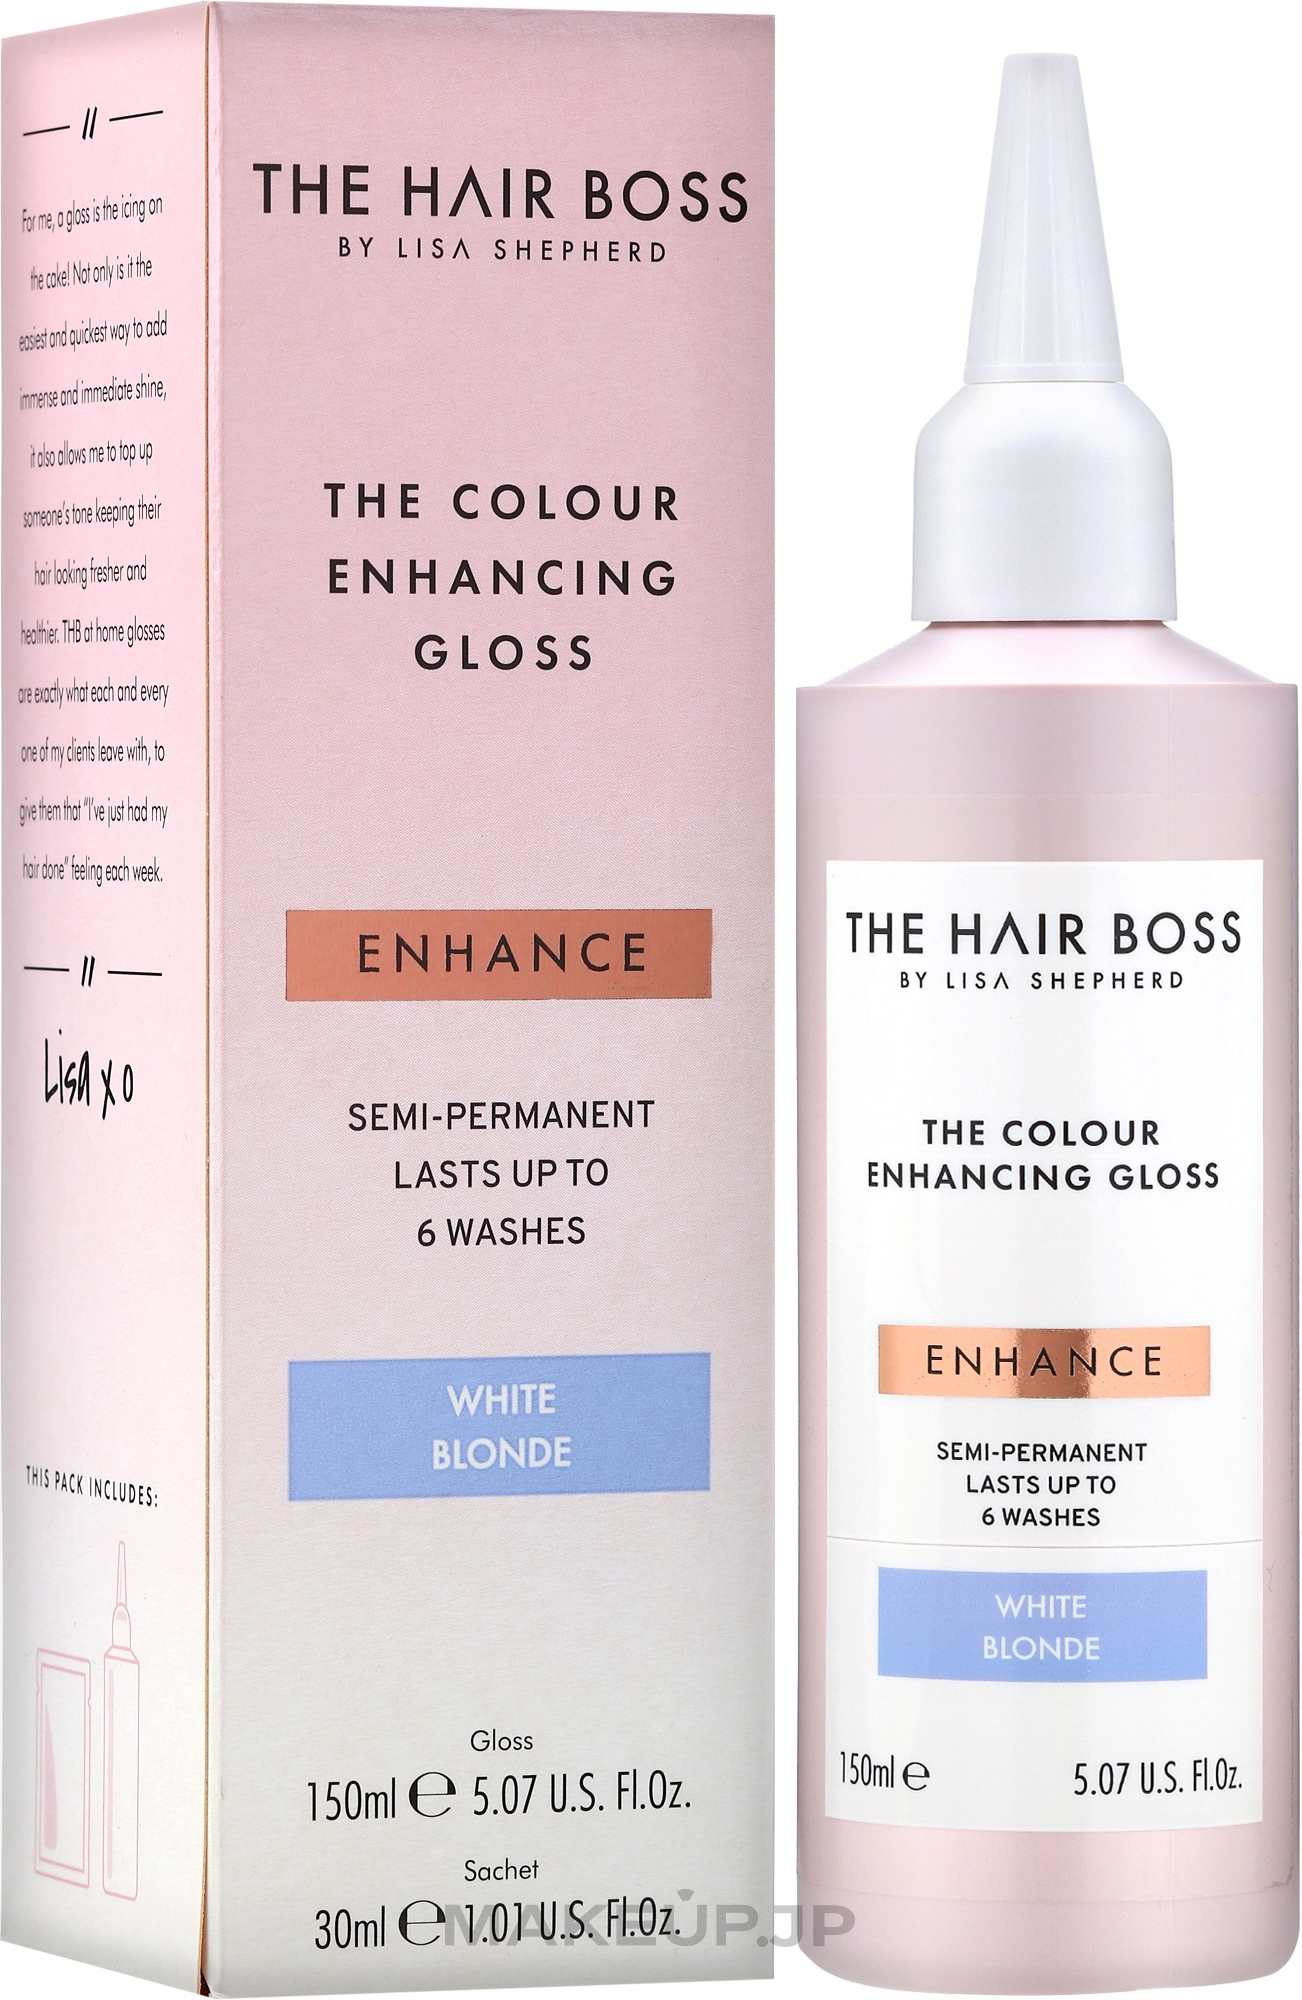 Color Enhancing Gloss White Blonde - The Hair Boss Colour Enhancing Gloss White Blond — photo 150 ml